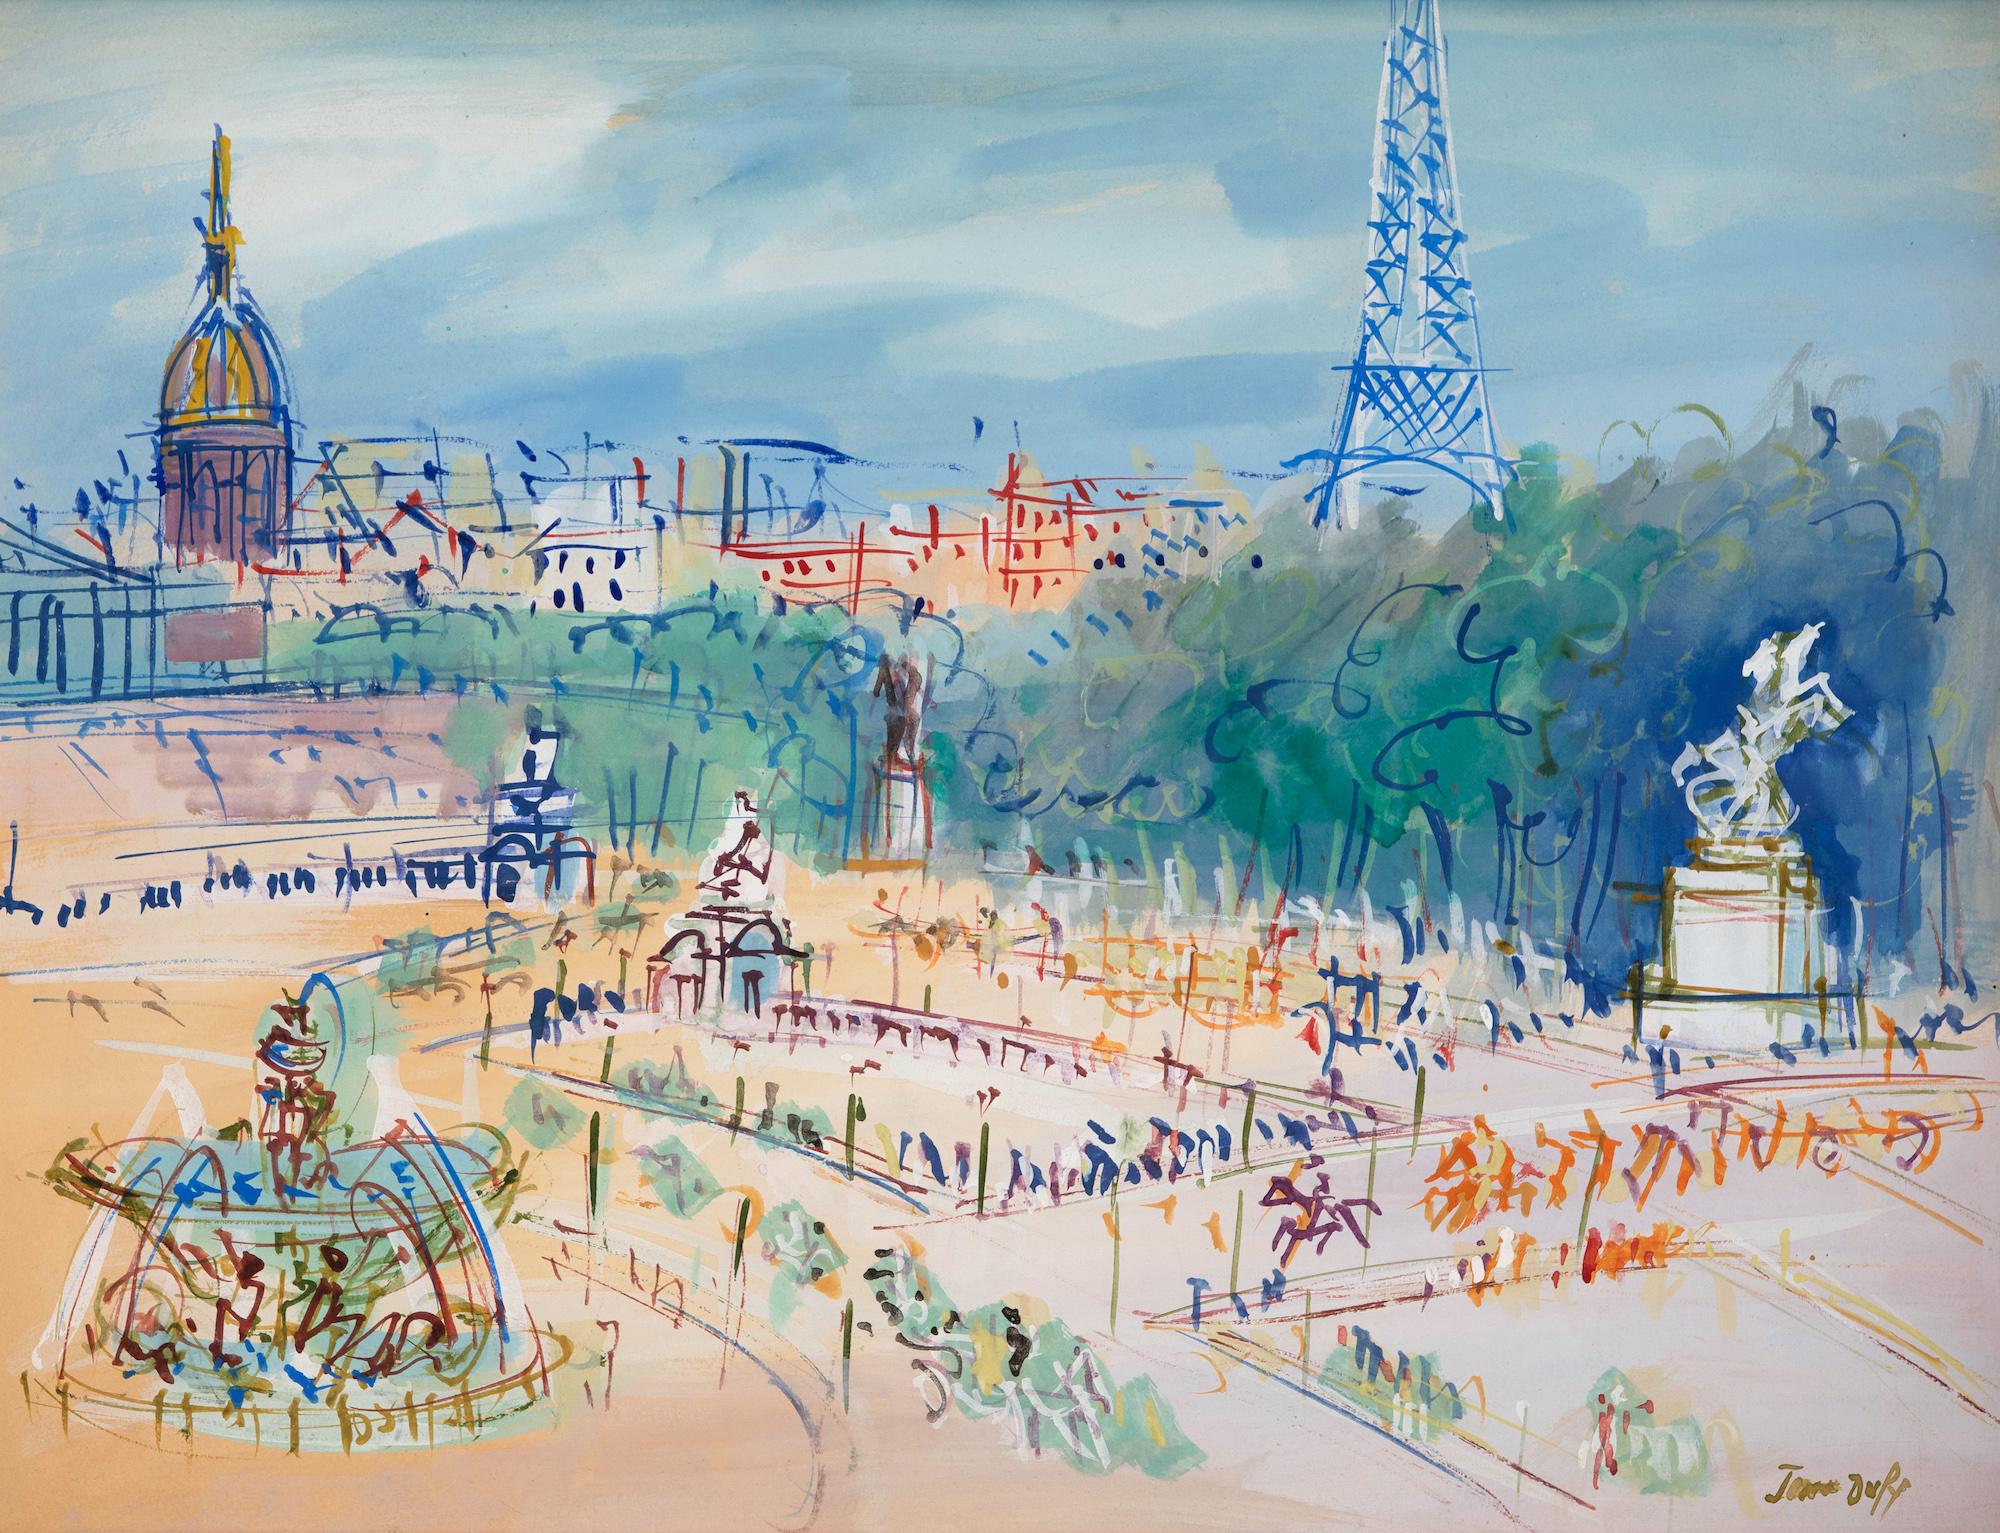 jean dufy paintings for sale